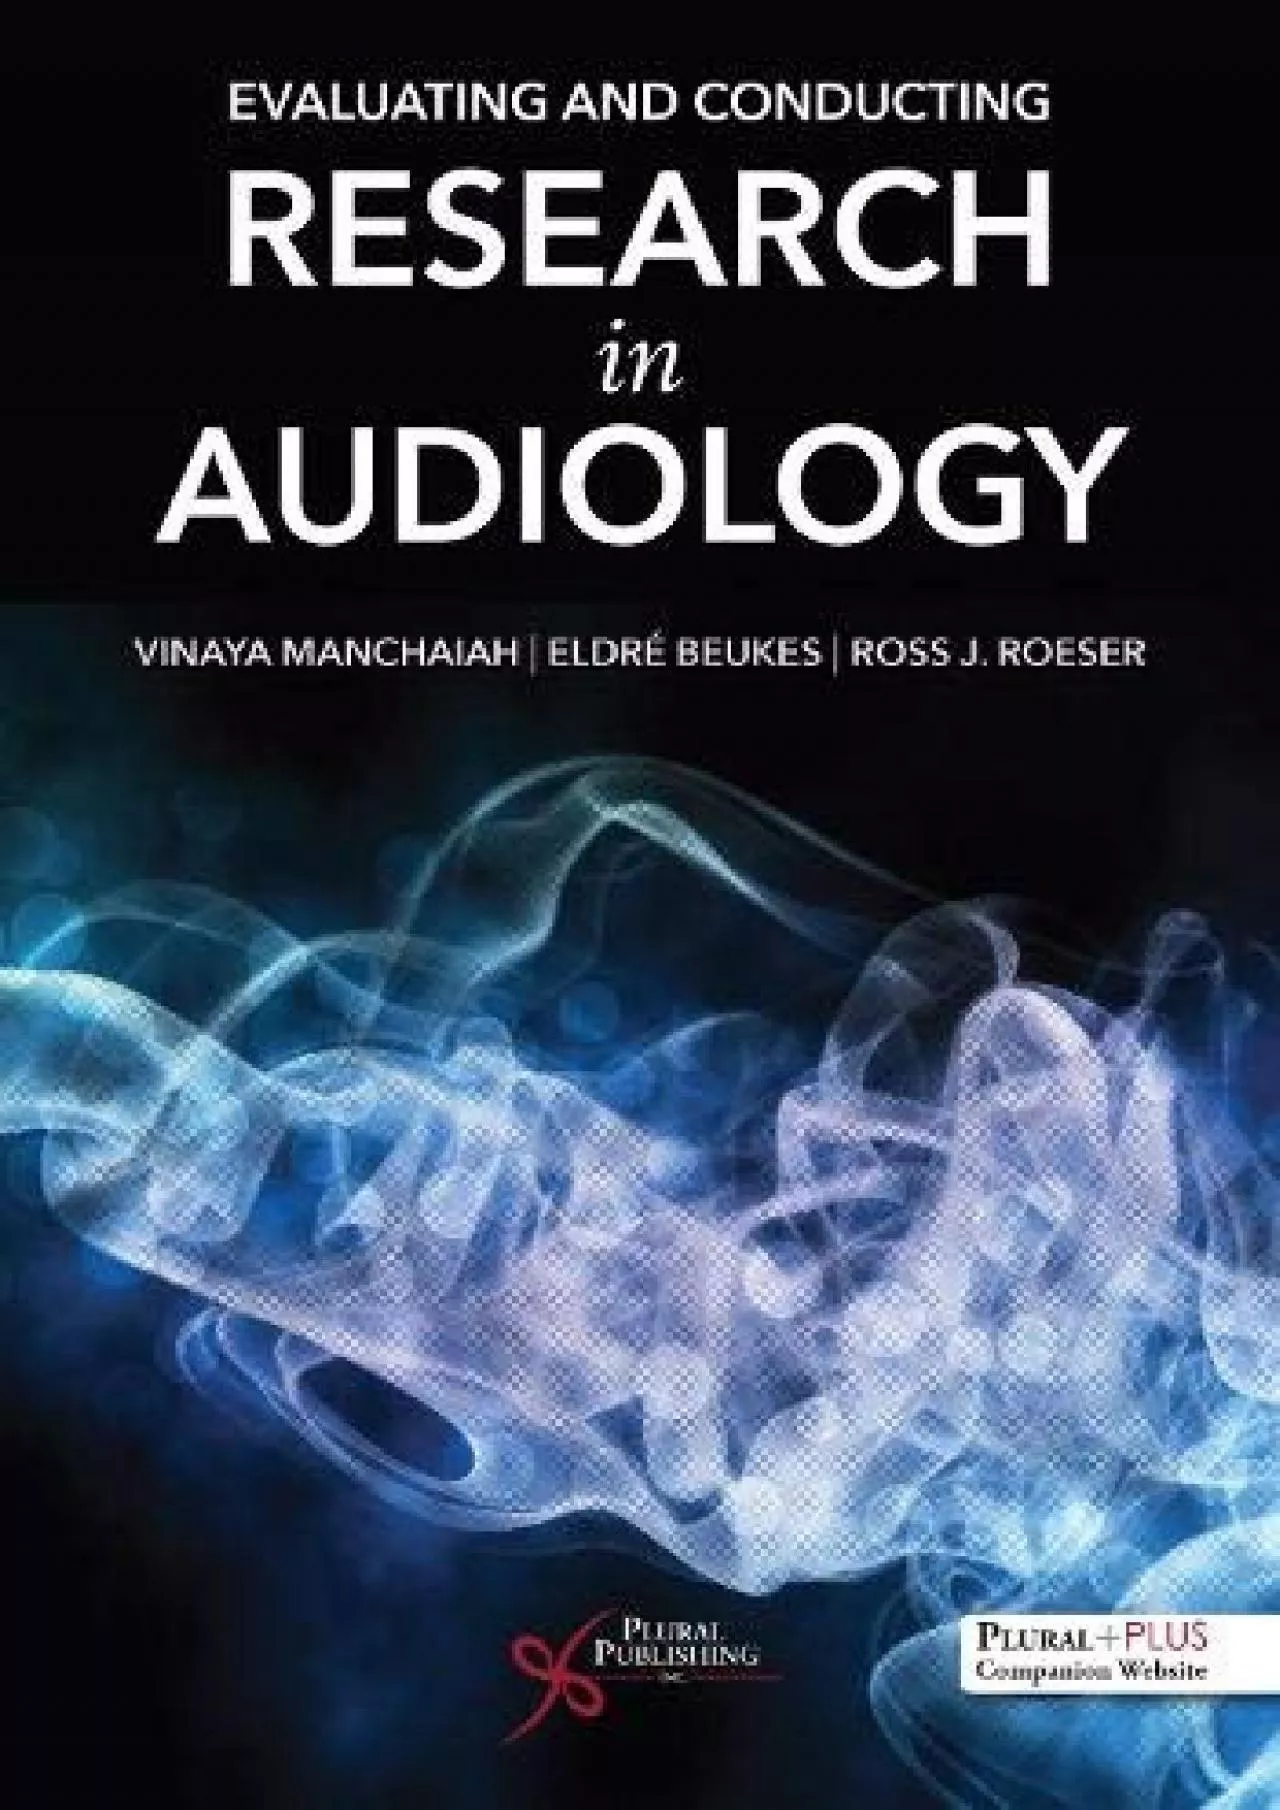 (EBOOK)-Evaluating and Conducting Research in Audiology